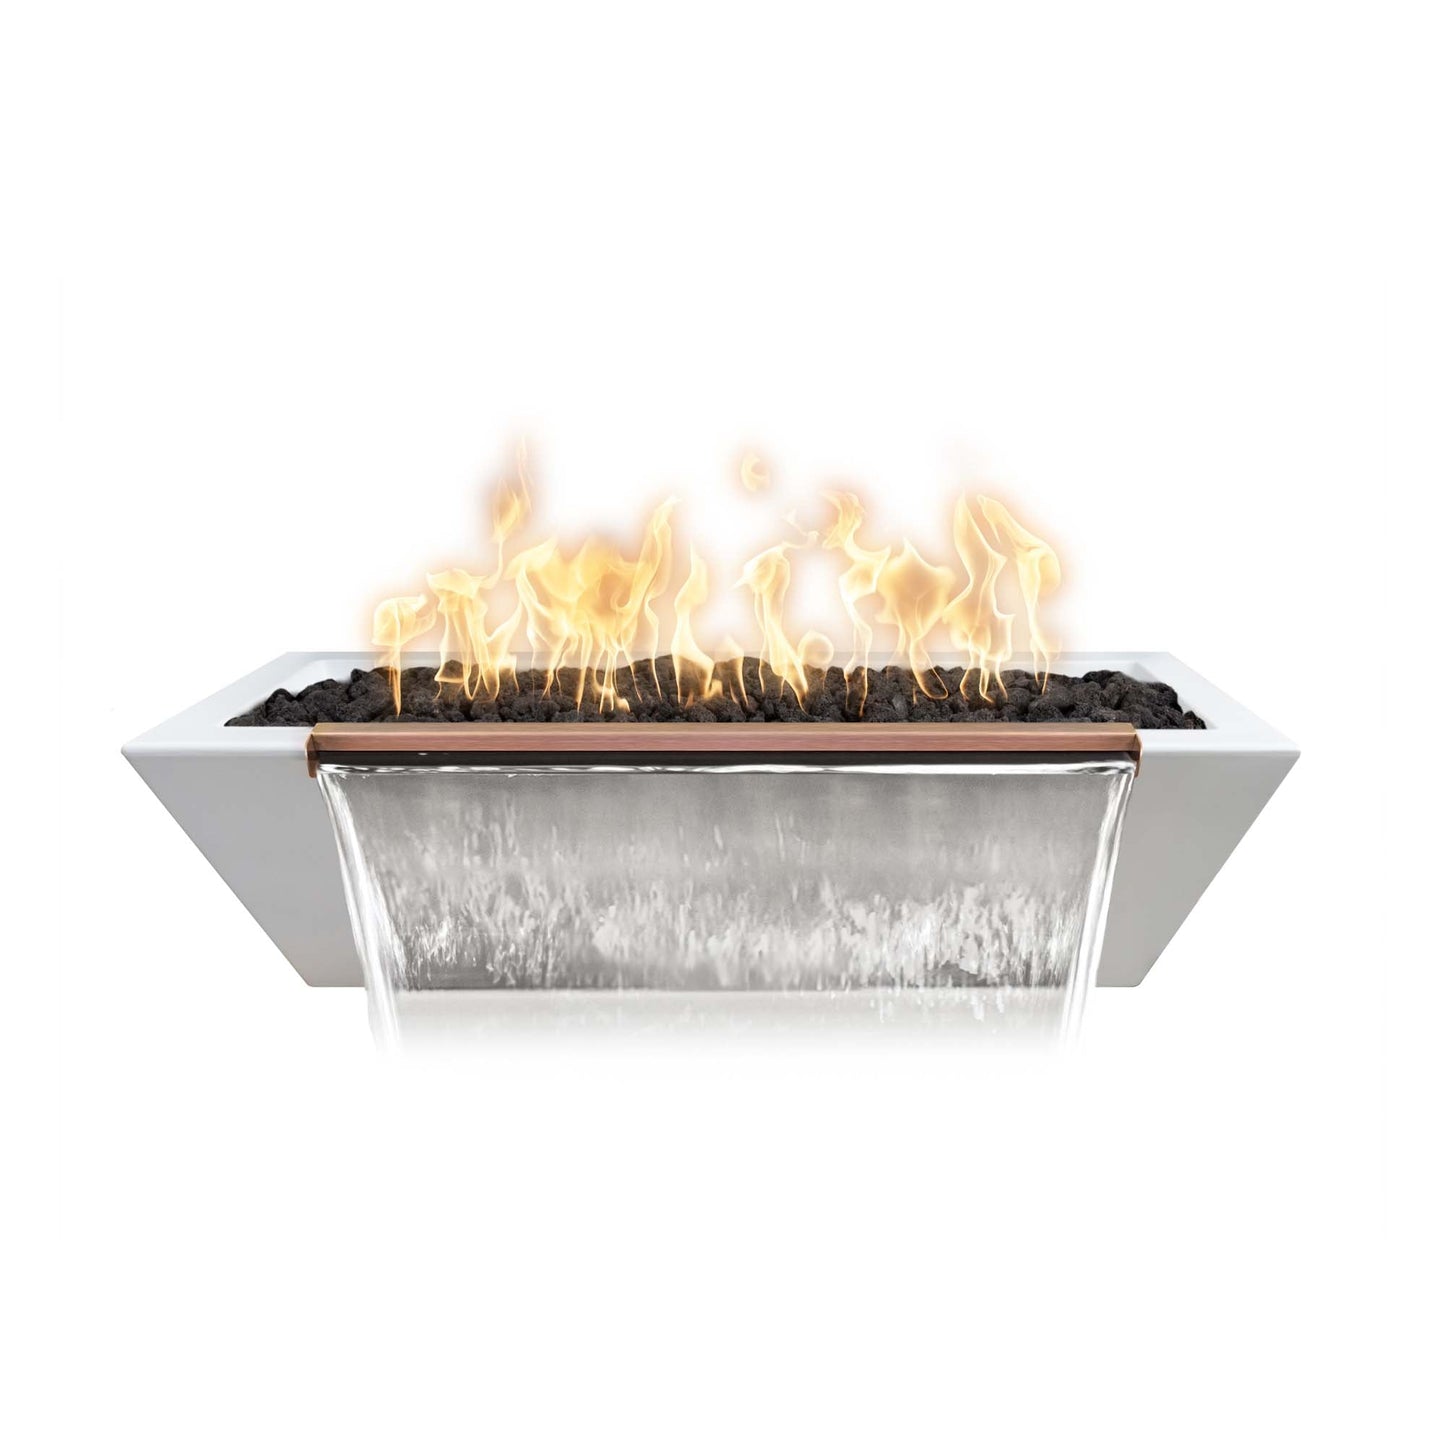 The Outdoor Plus Linear Maya 72" Metallic Slate GFRC Concrete Liquid Propane Fire & Water Bowl with 12V Electronic Ignition